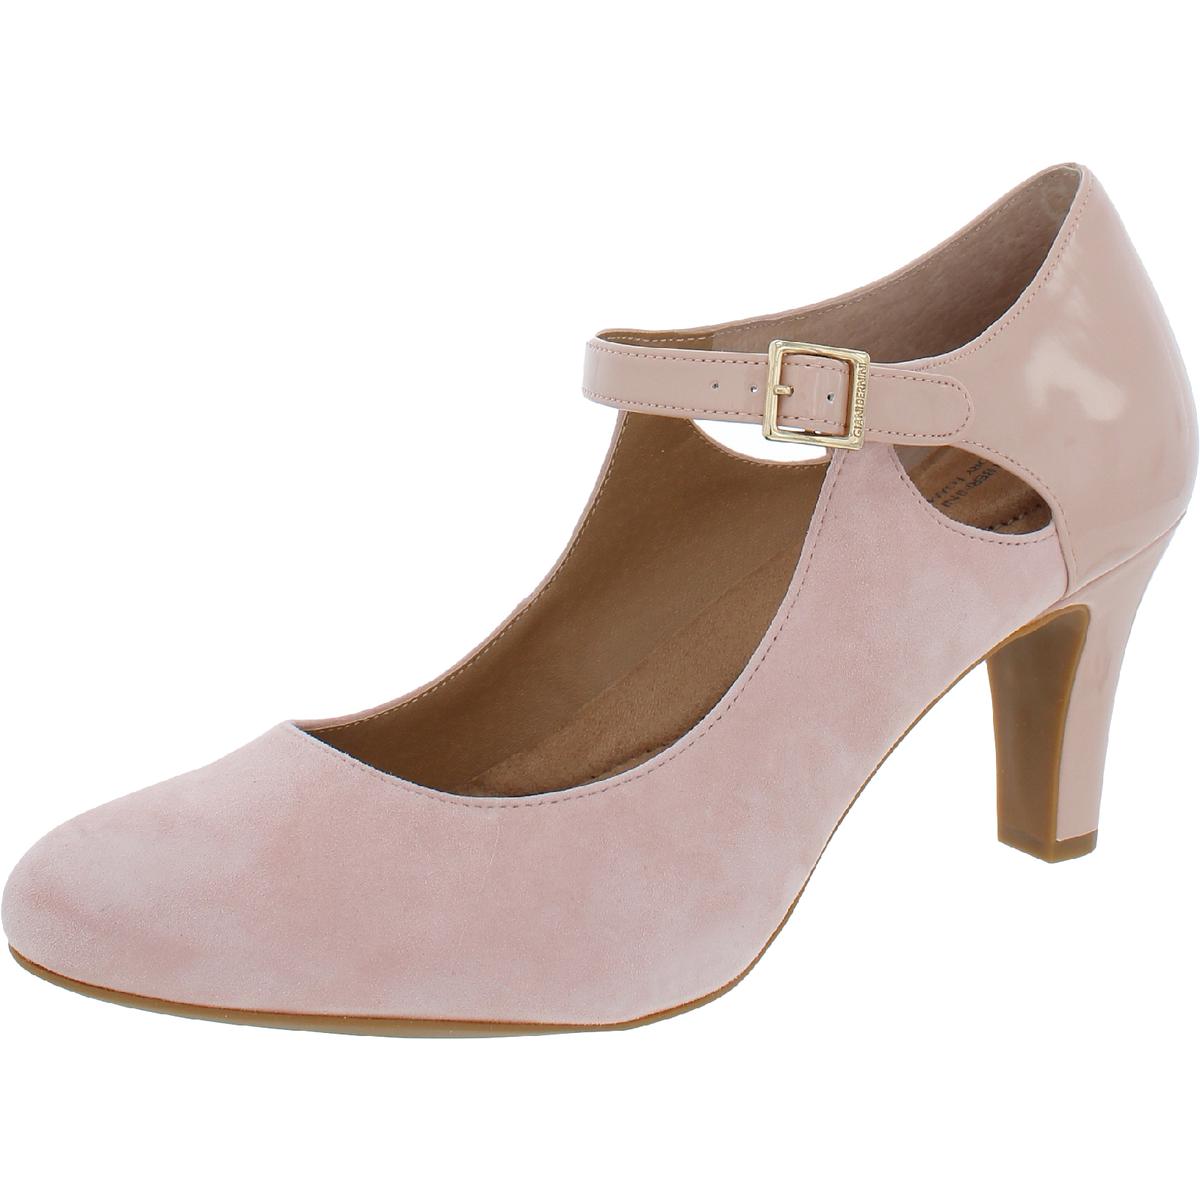 Blush Suede Patent